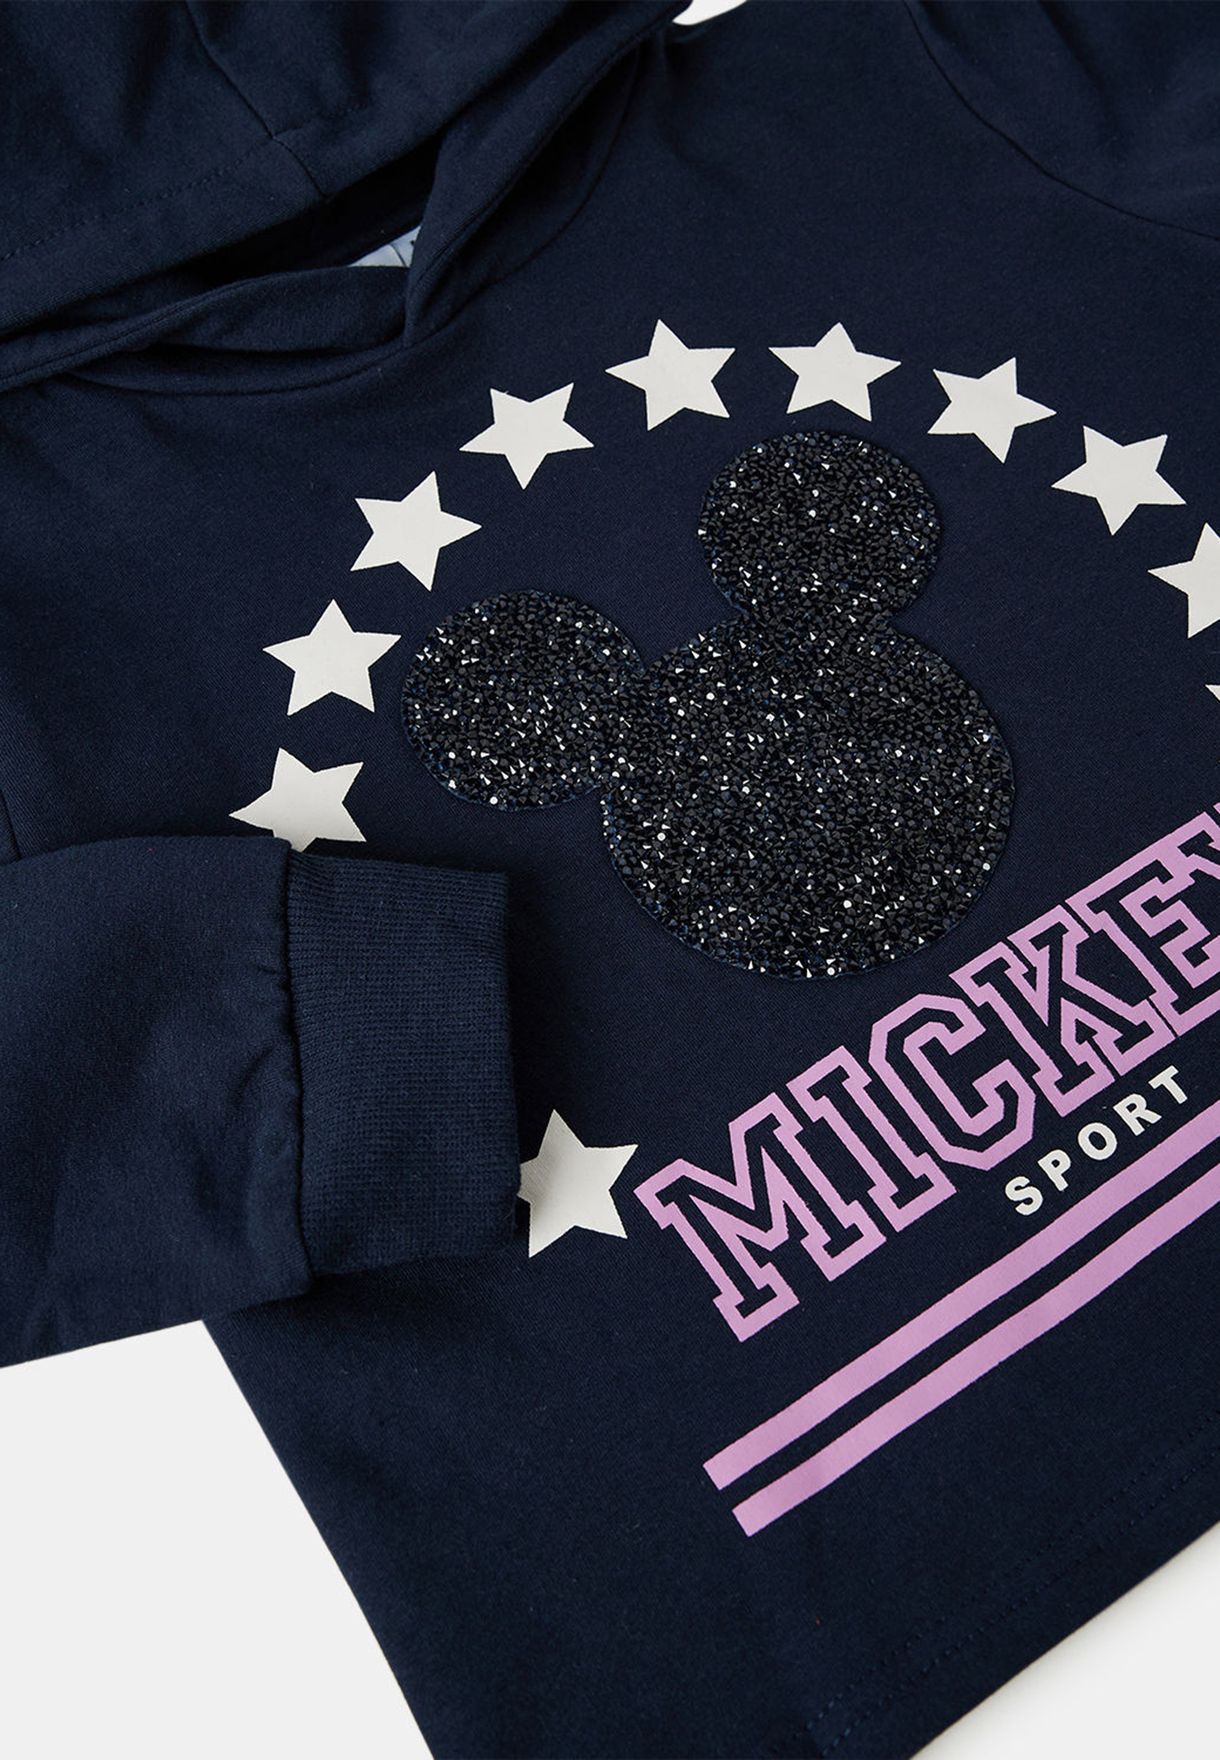 Kids Mickey Relaxed Hoodie